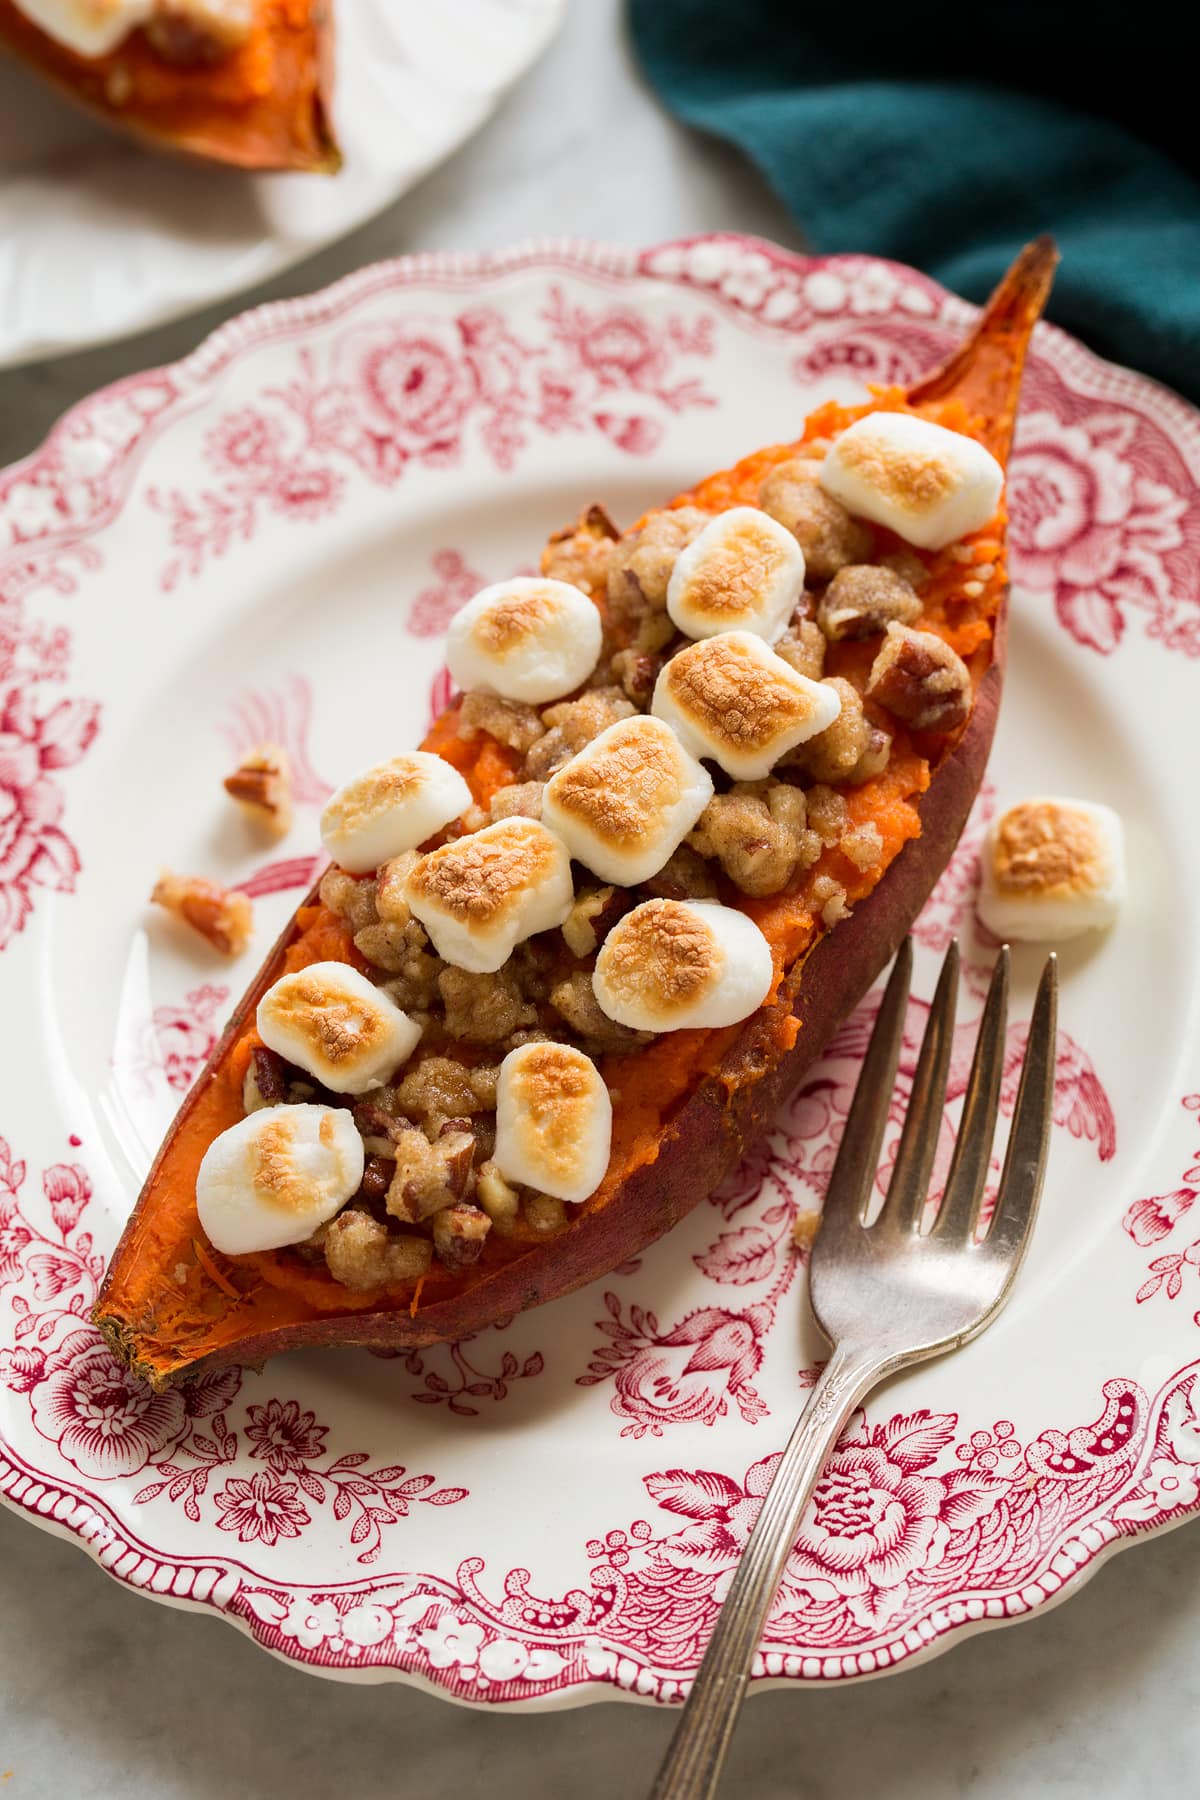 A single twice baked sweet potato on a pretty red and white floral vintage plate.